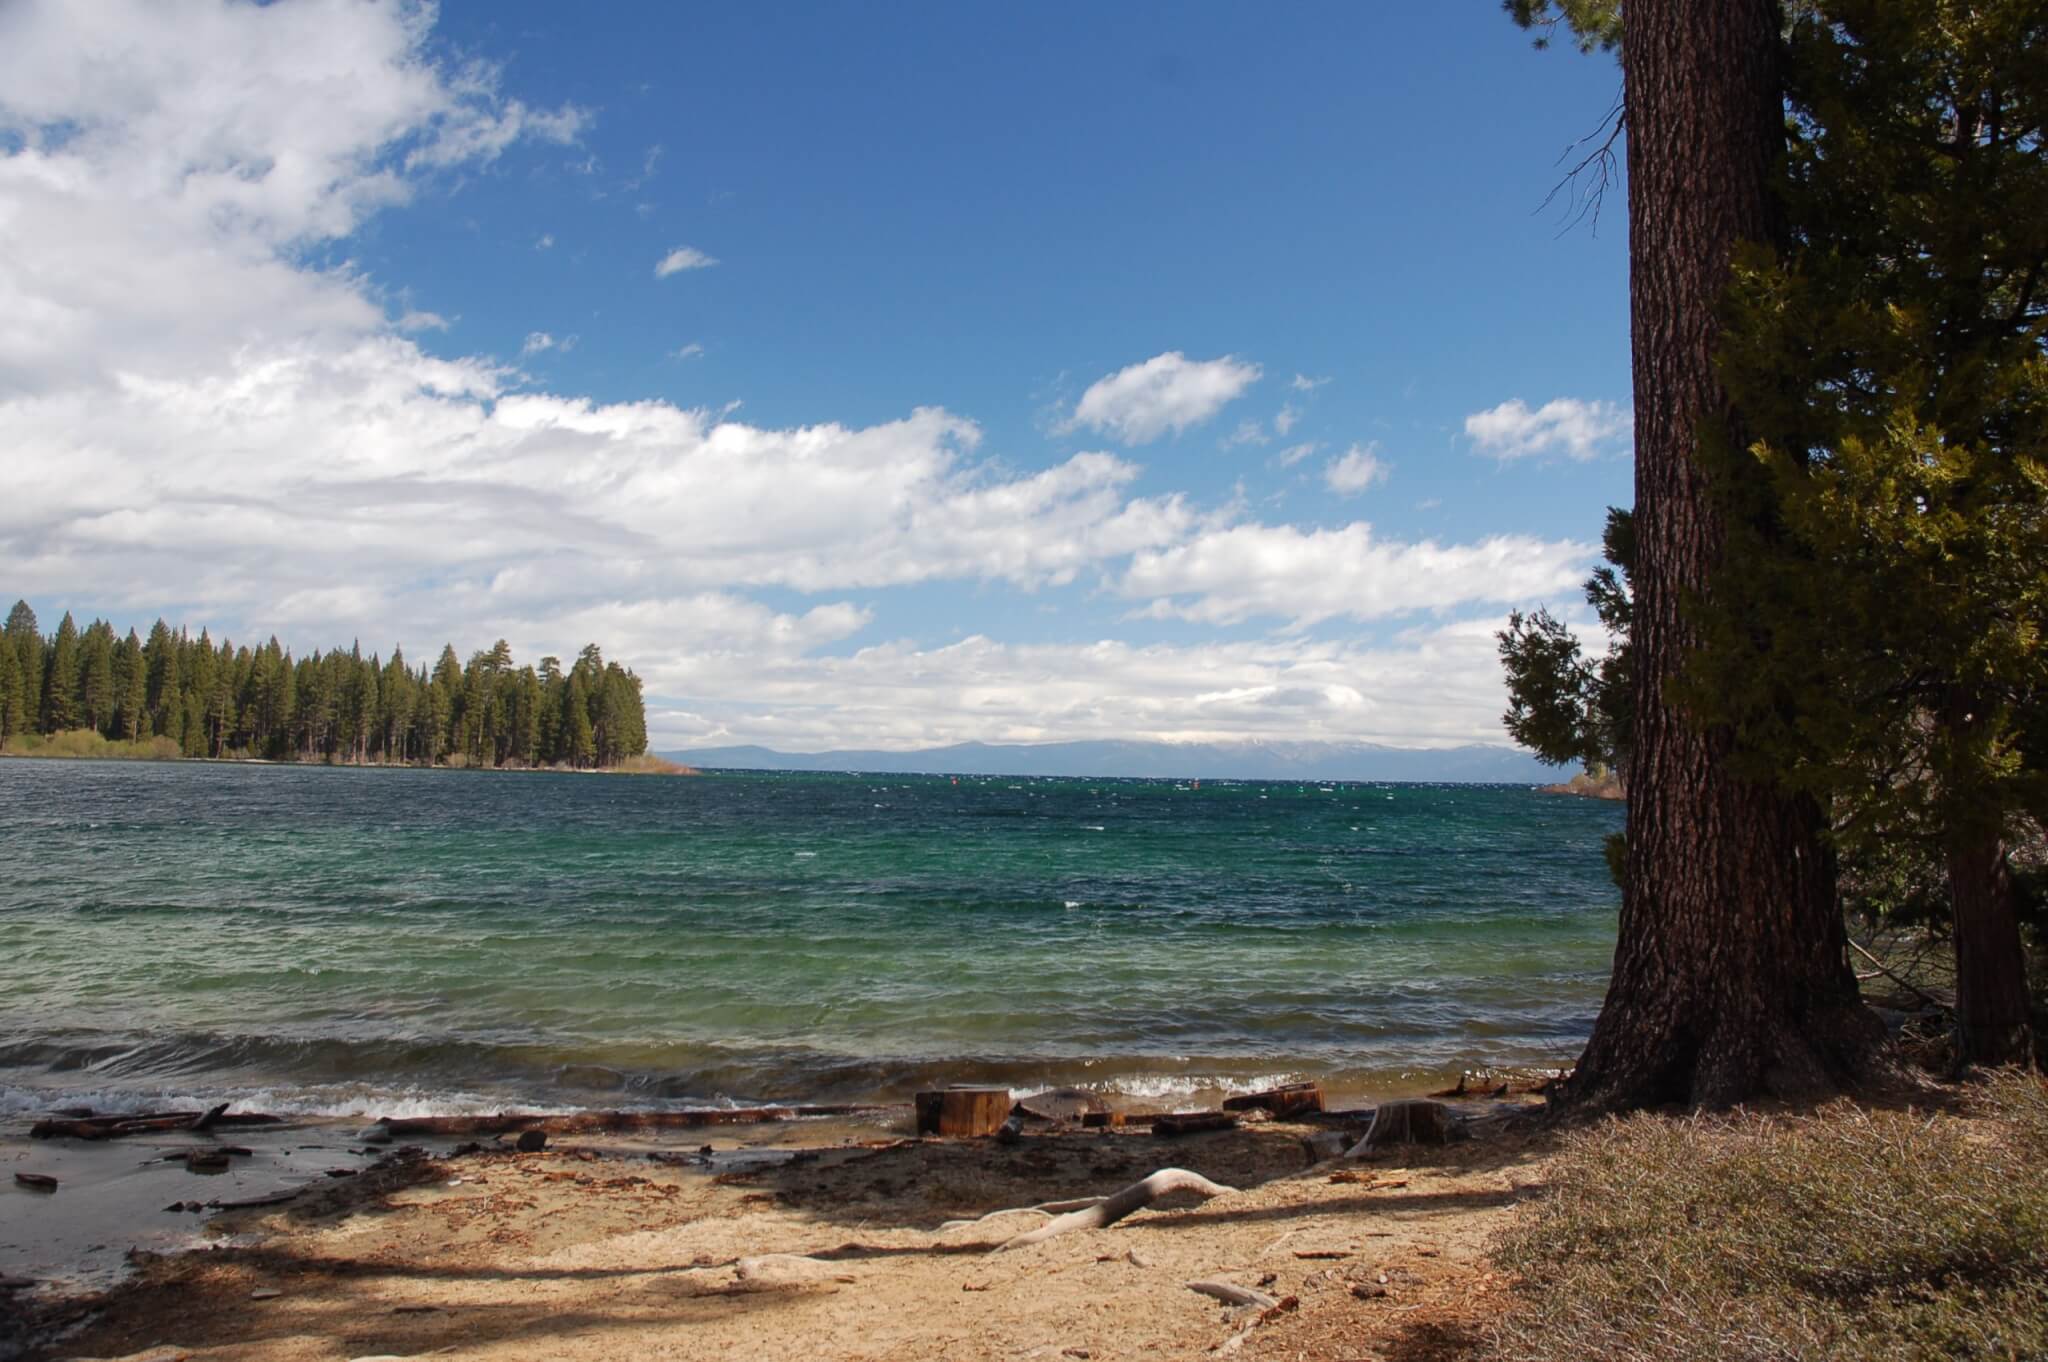 Reserving A California State Park Campsite Gets Easier - Emerald Bay